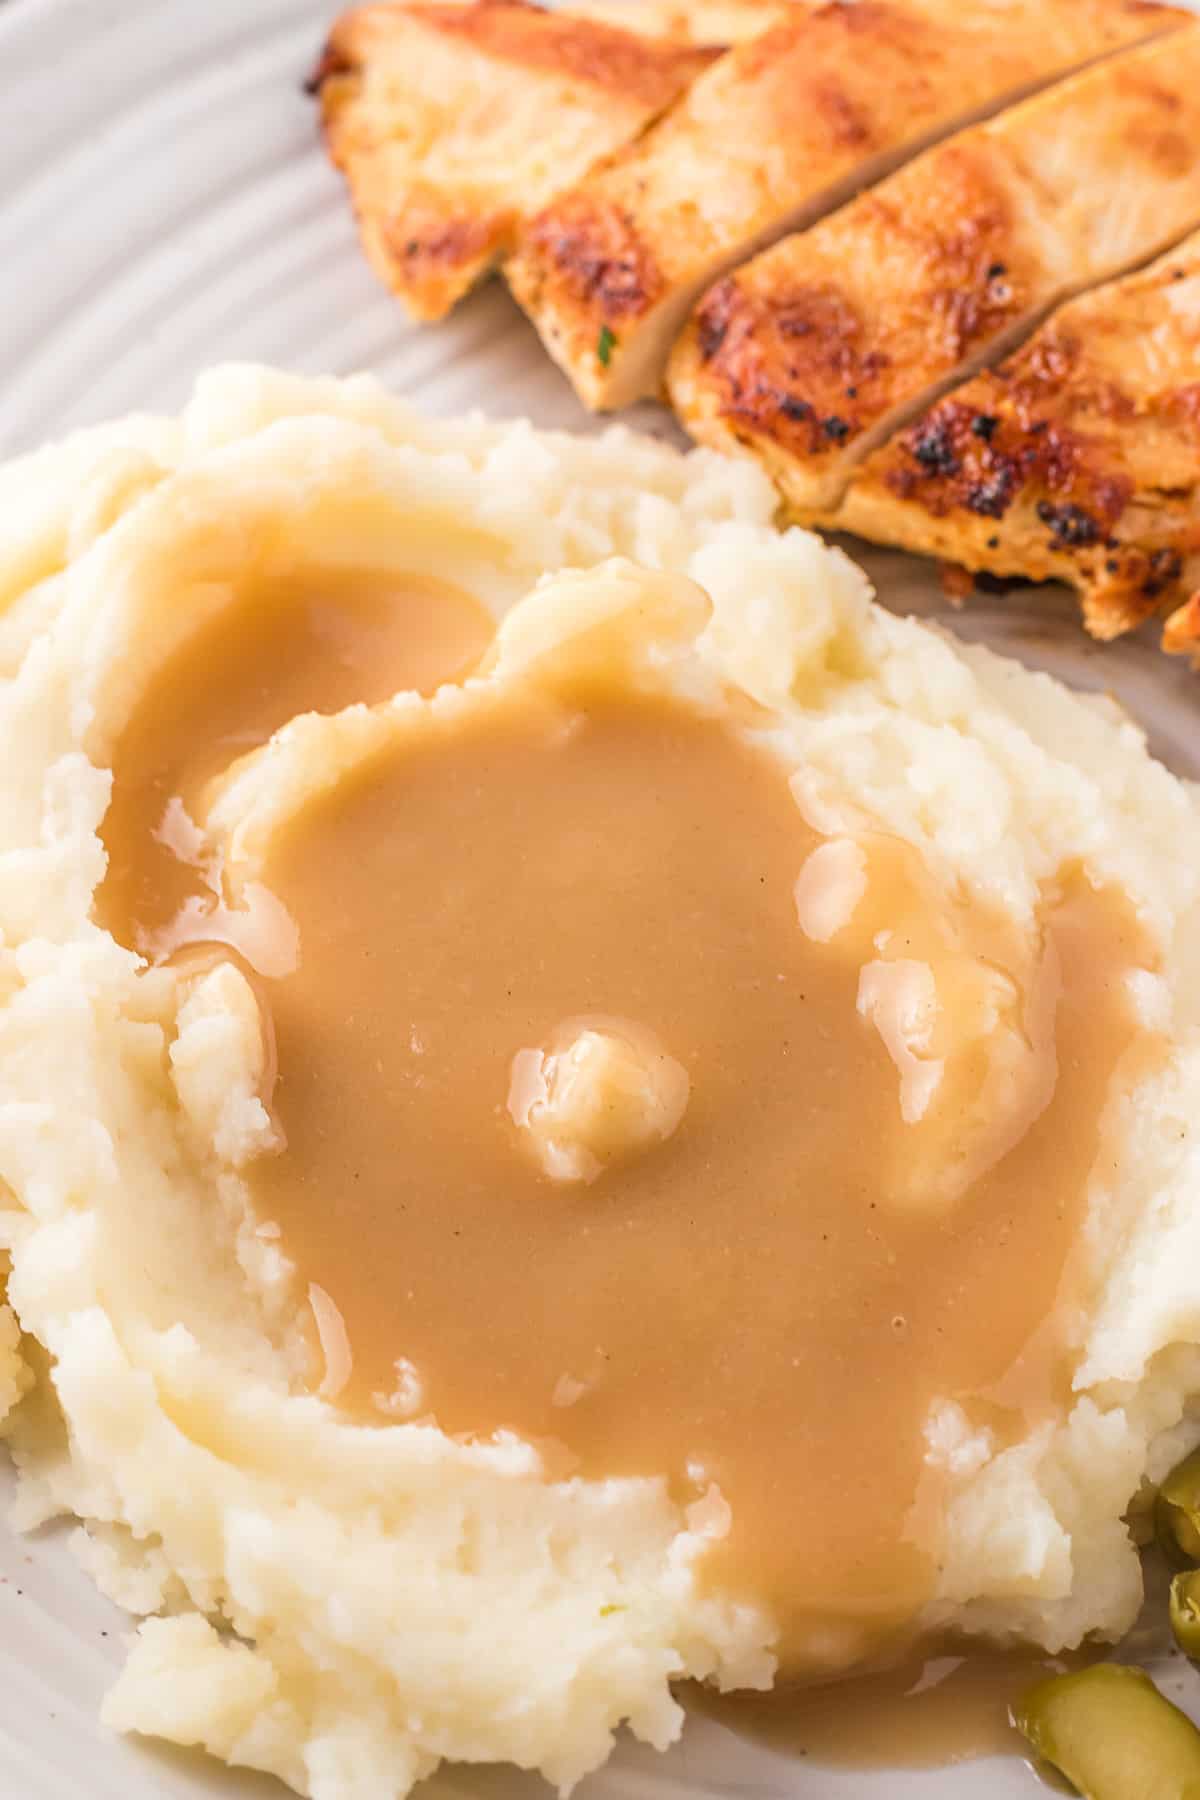 Mashed potatoes with dairy-free brown gravy.